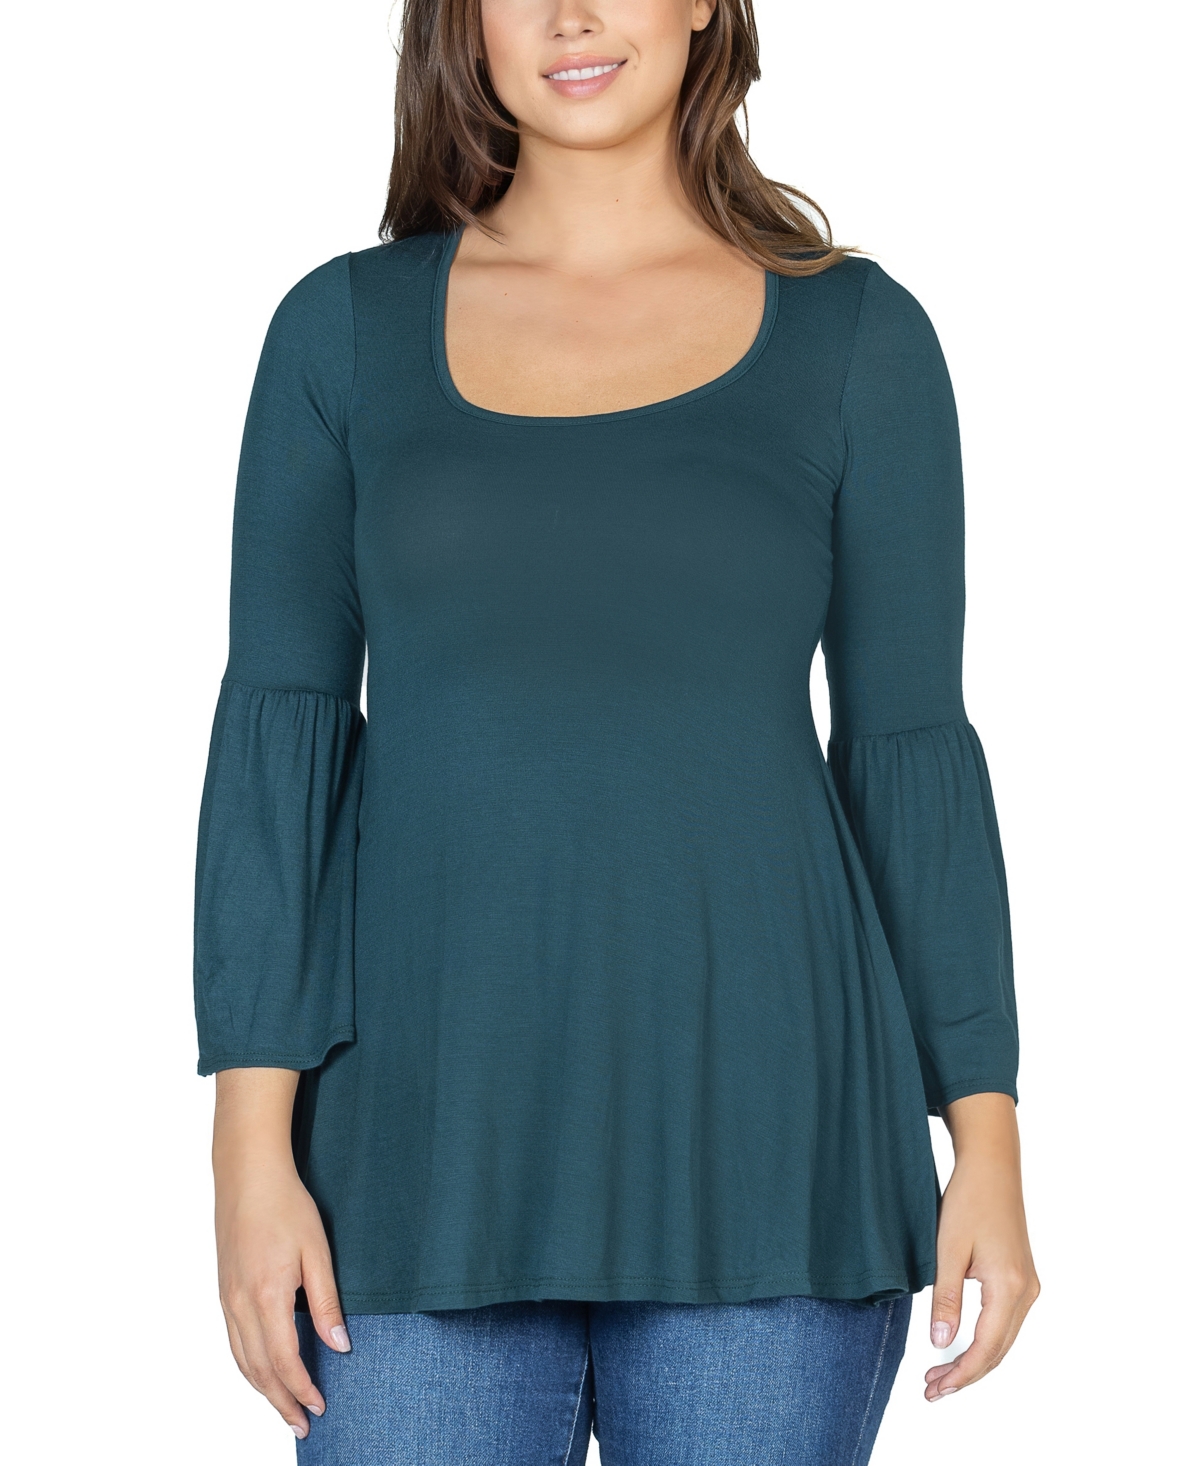 24seven Comfort Apparel Women's Bell Sleeve Flared Tunic Top In Hunter